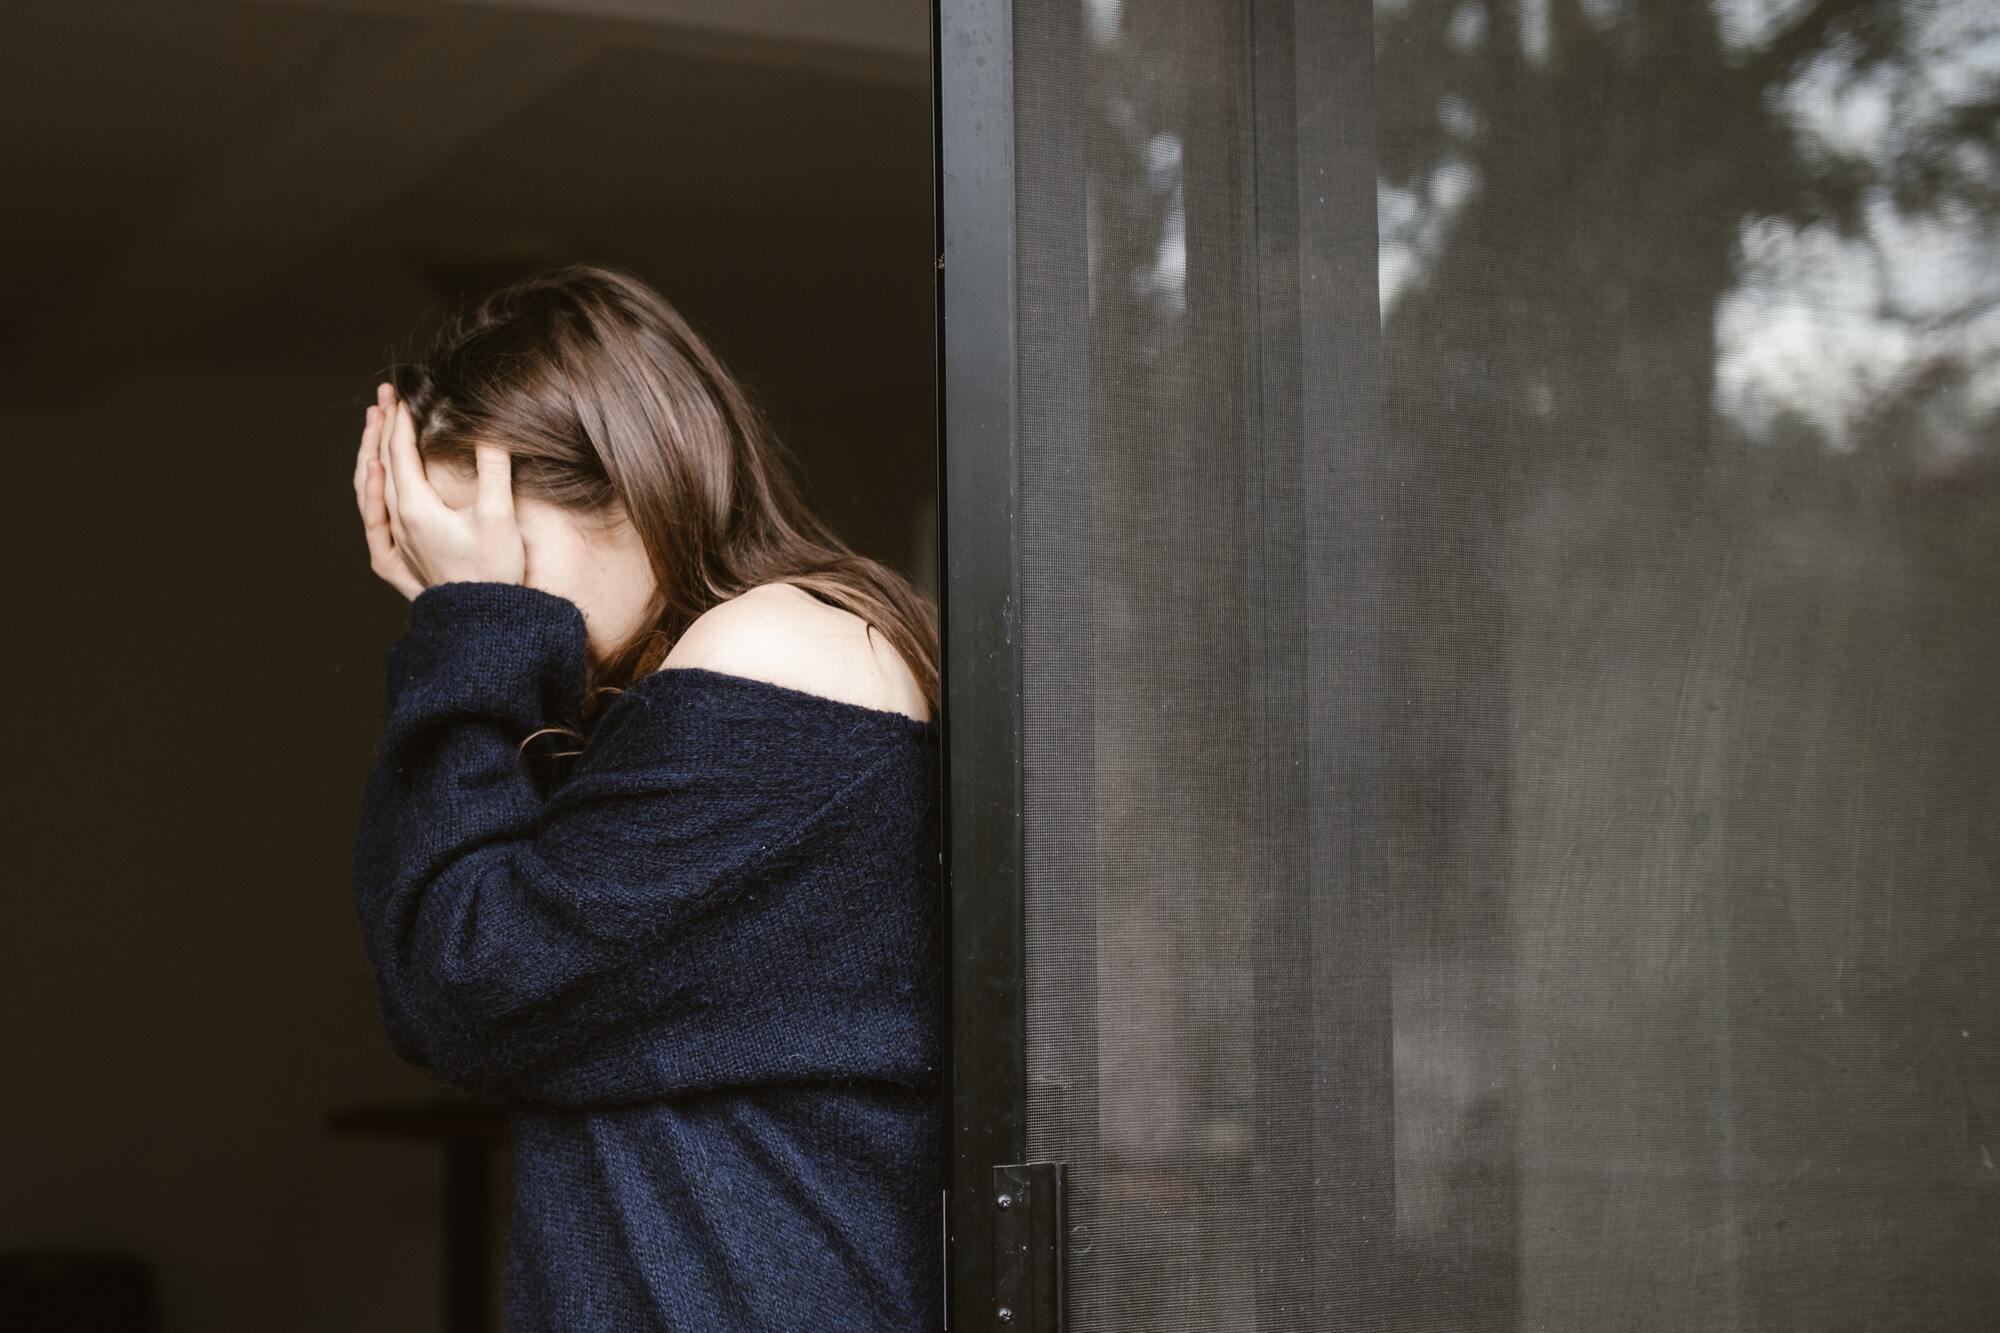 It is almost impossible to cope with violence while being in a relationship with an abuser